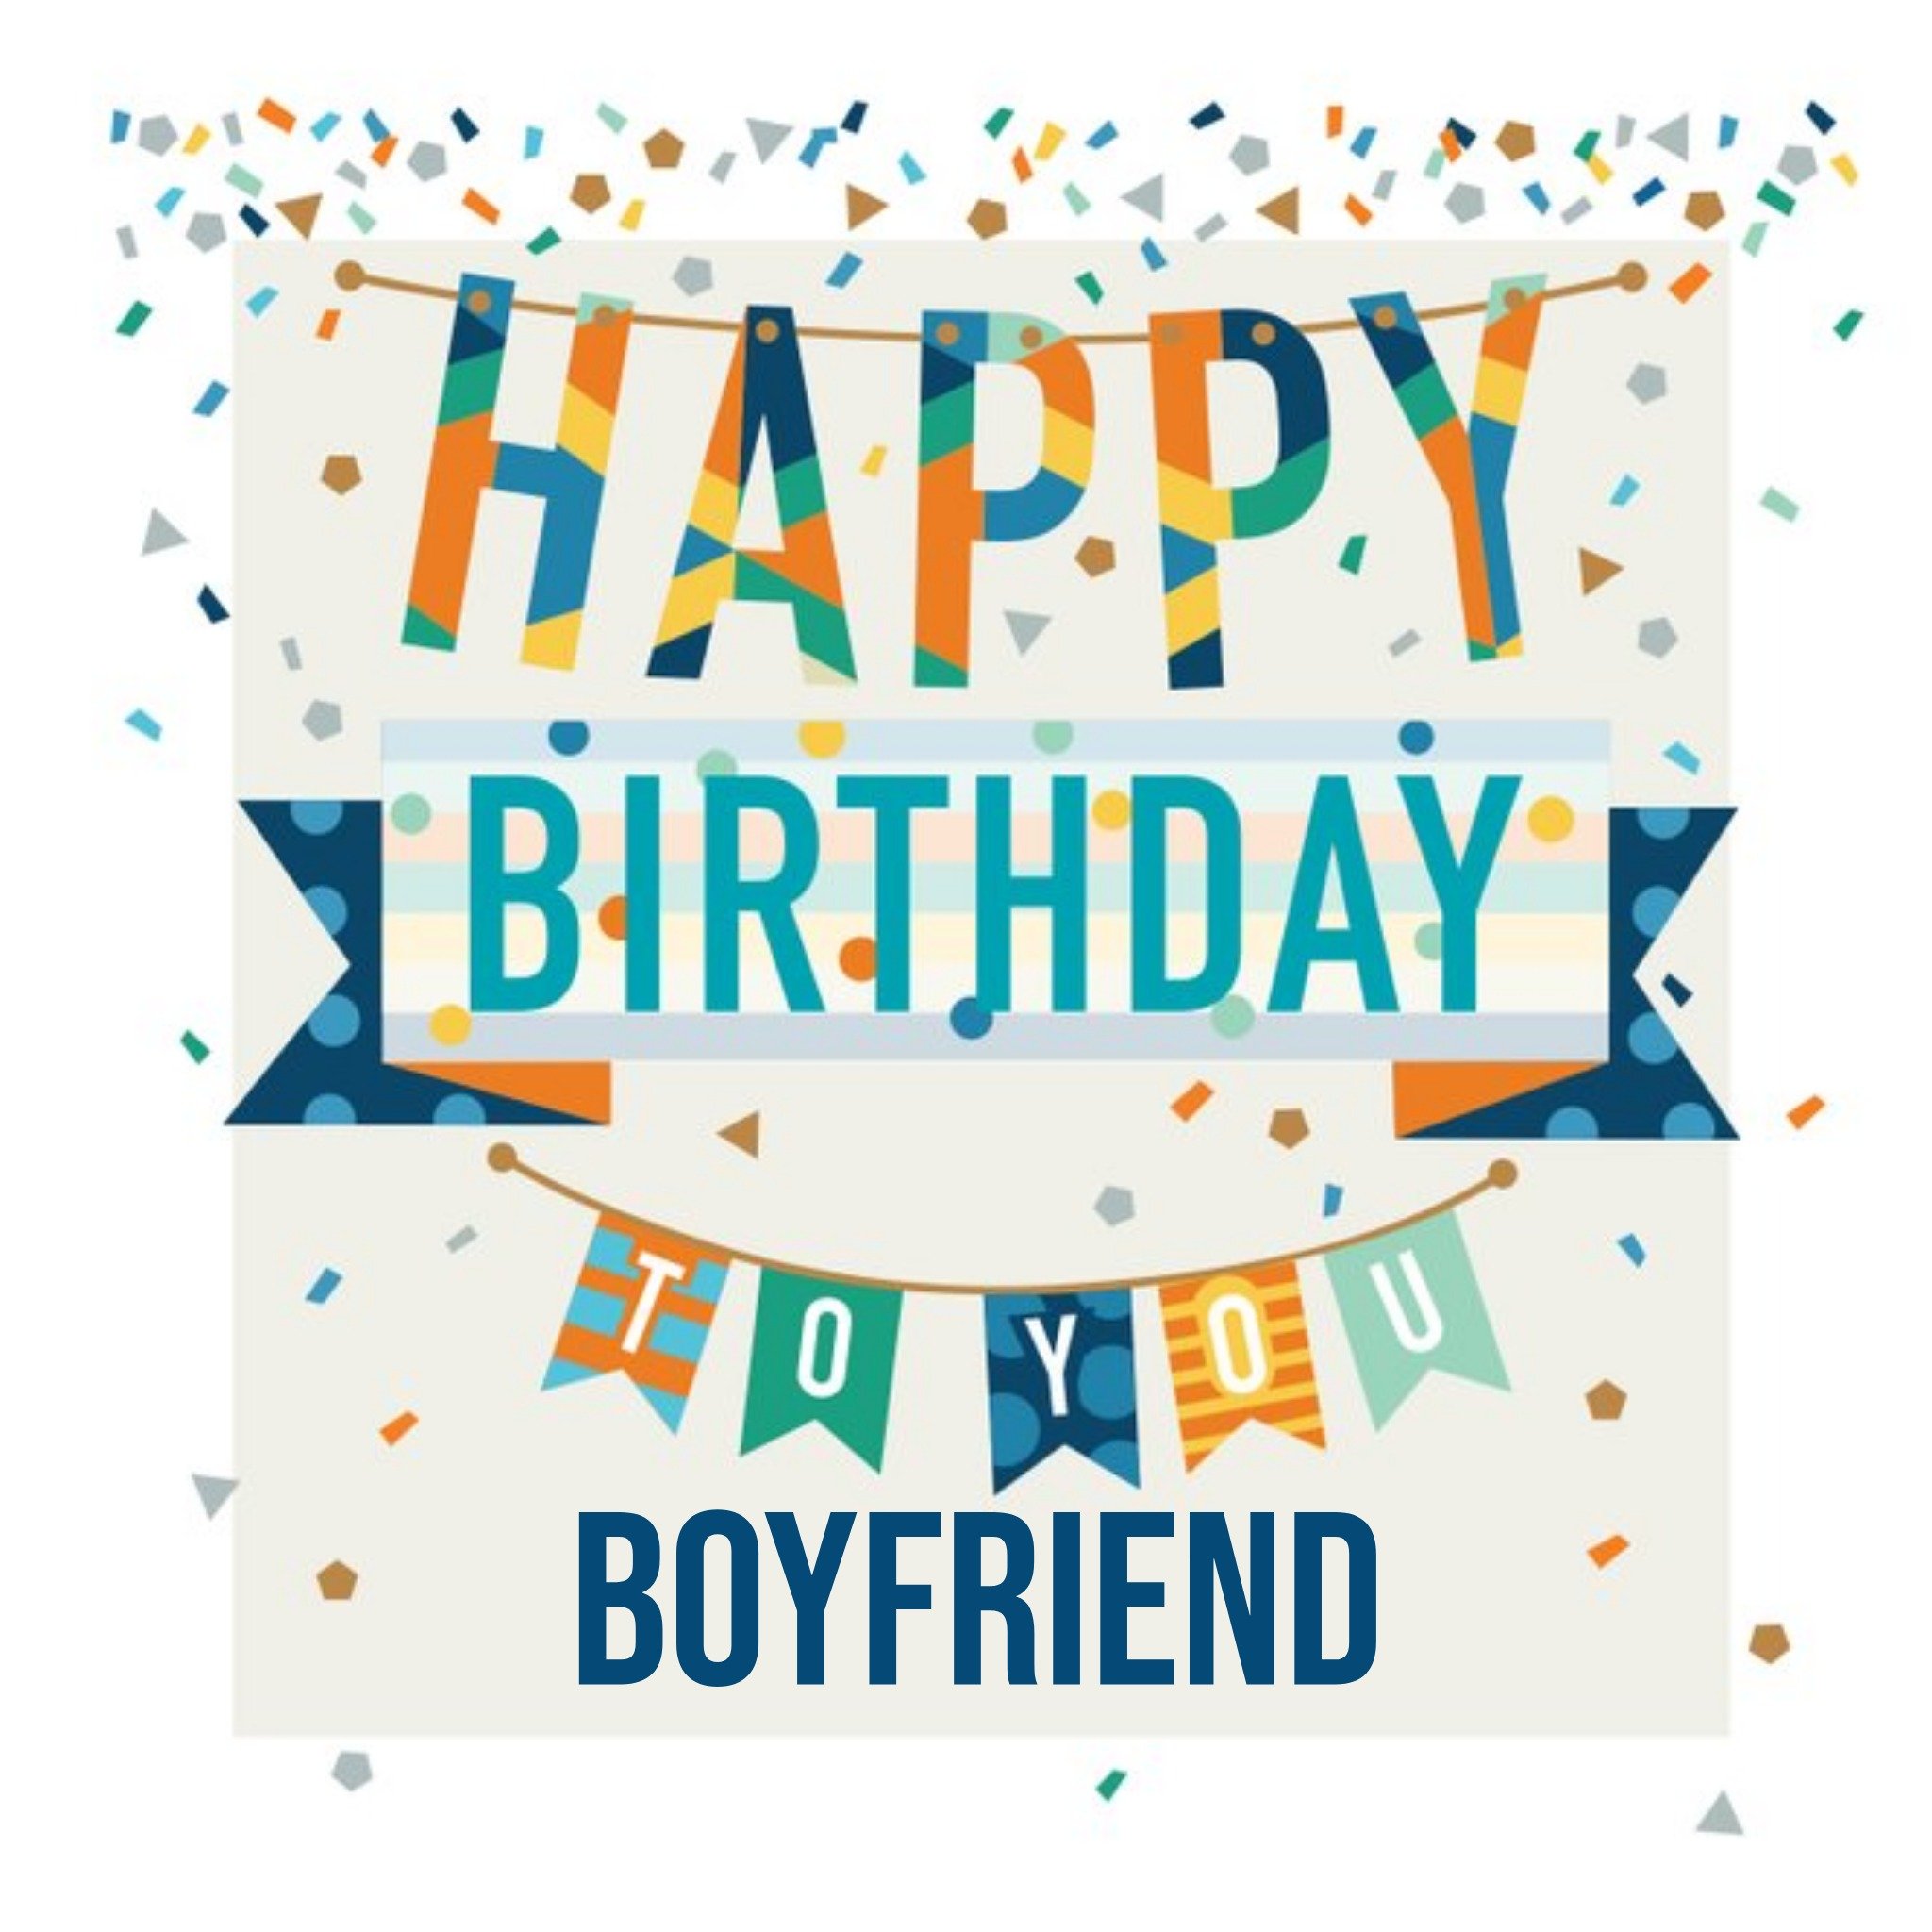 Ling Design Illustration Of Buntings And Confetti Boyfriend Personalised Birthday Card, Square